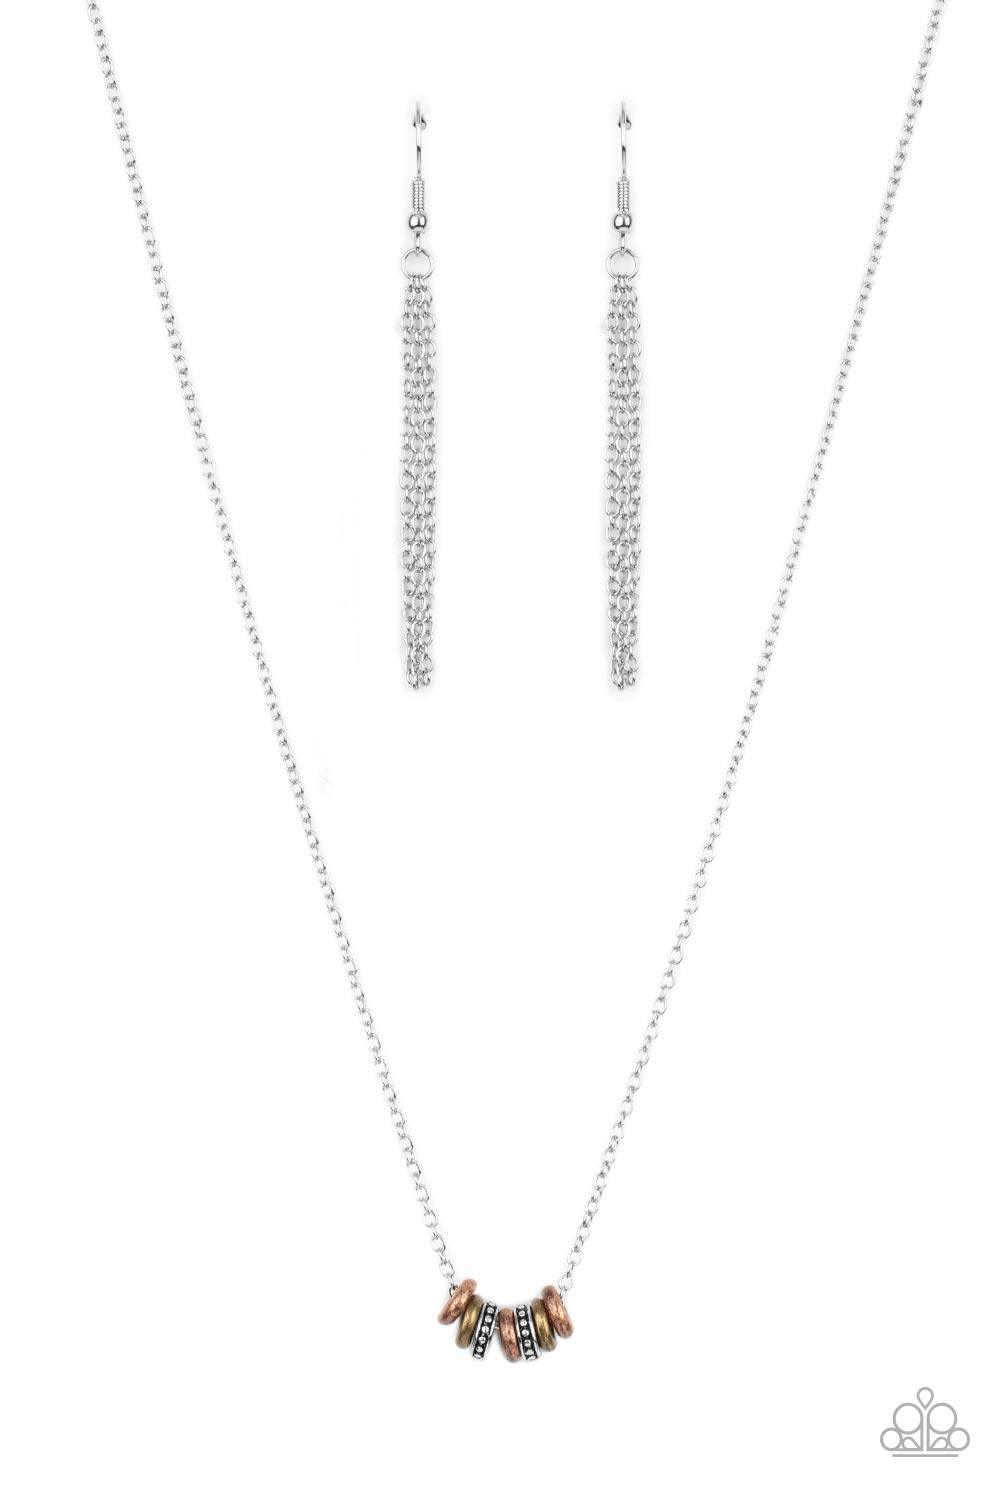 Paparazzi Accessories Dainty Dalliance - Multi An antiqued collection of smooth brass and copper rings and studded silver rings glide along a dainty silver chain below the collar, creating a minimalist inspired look. Features an adjustable clasp closure.